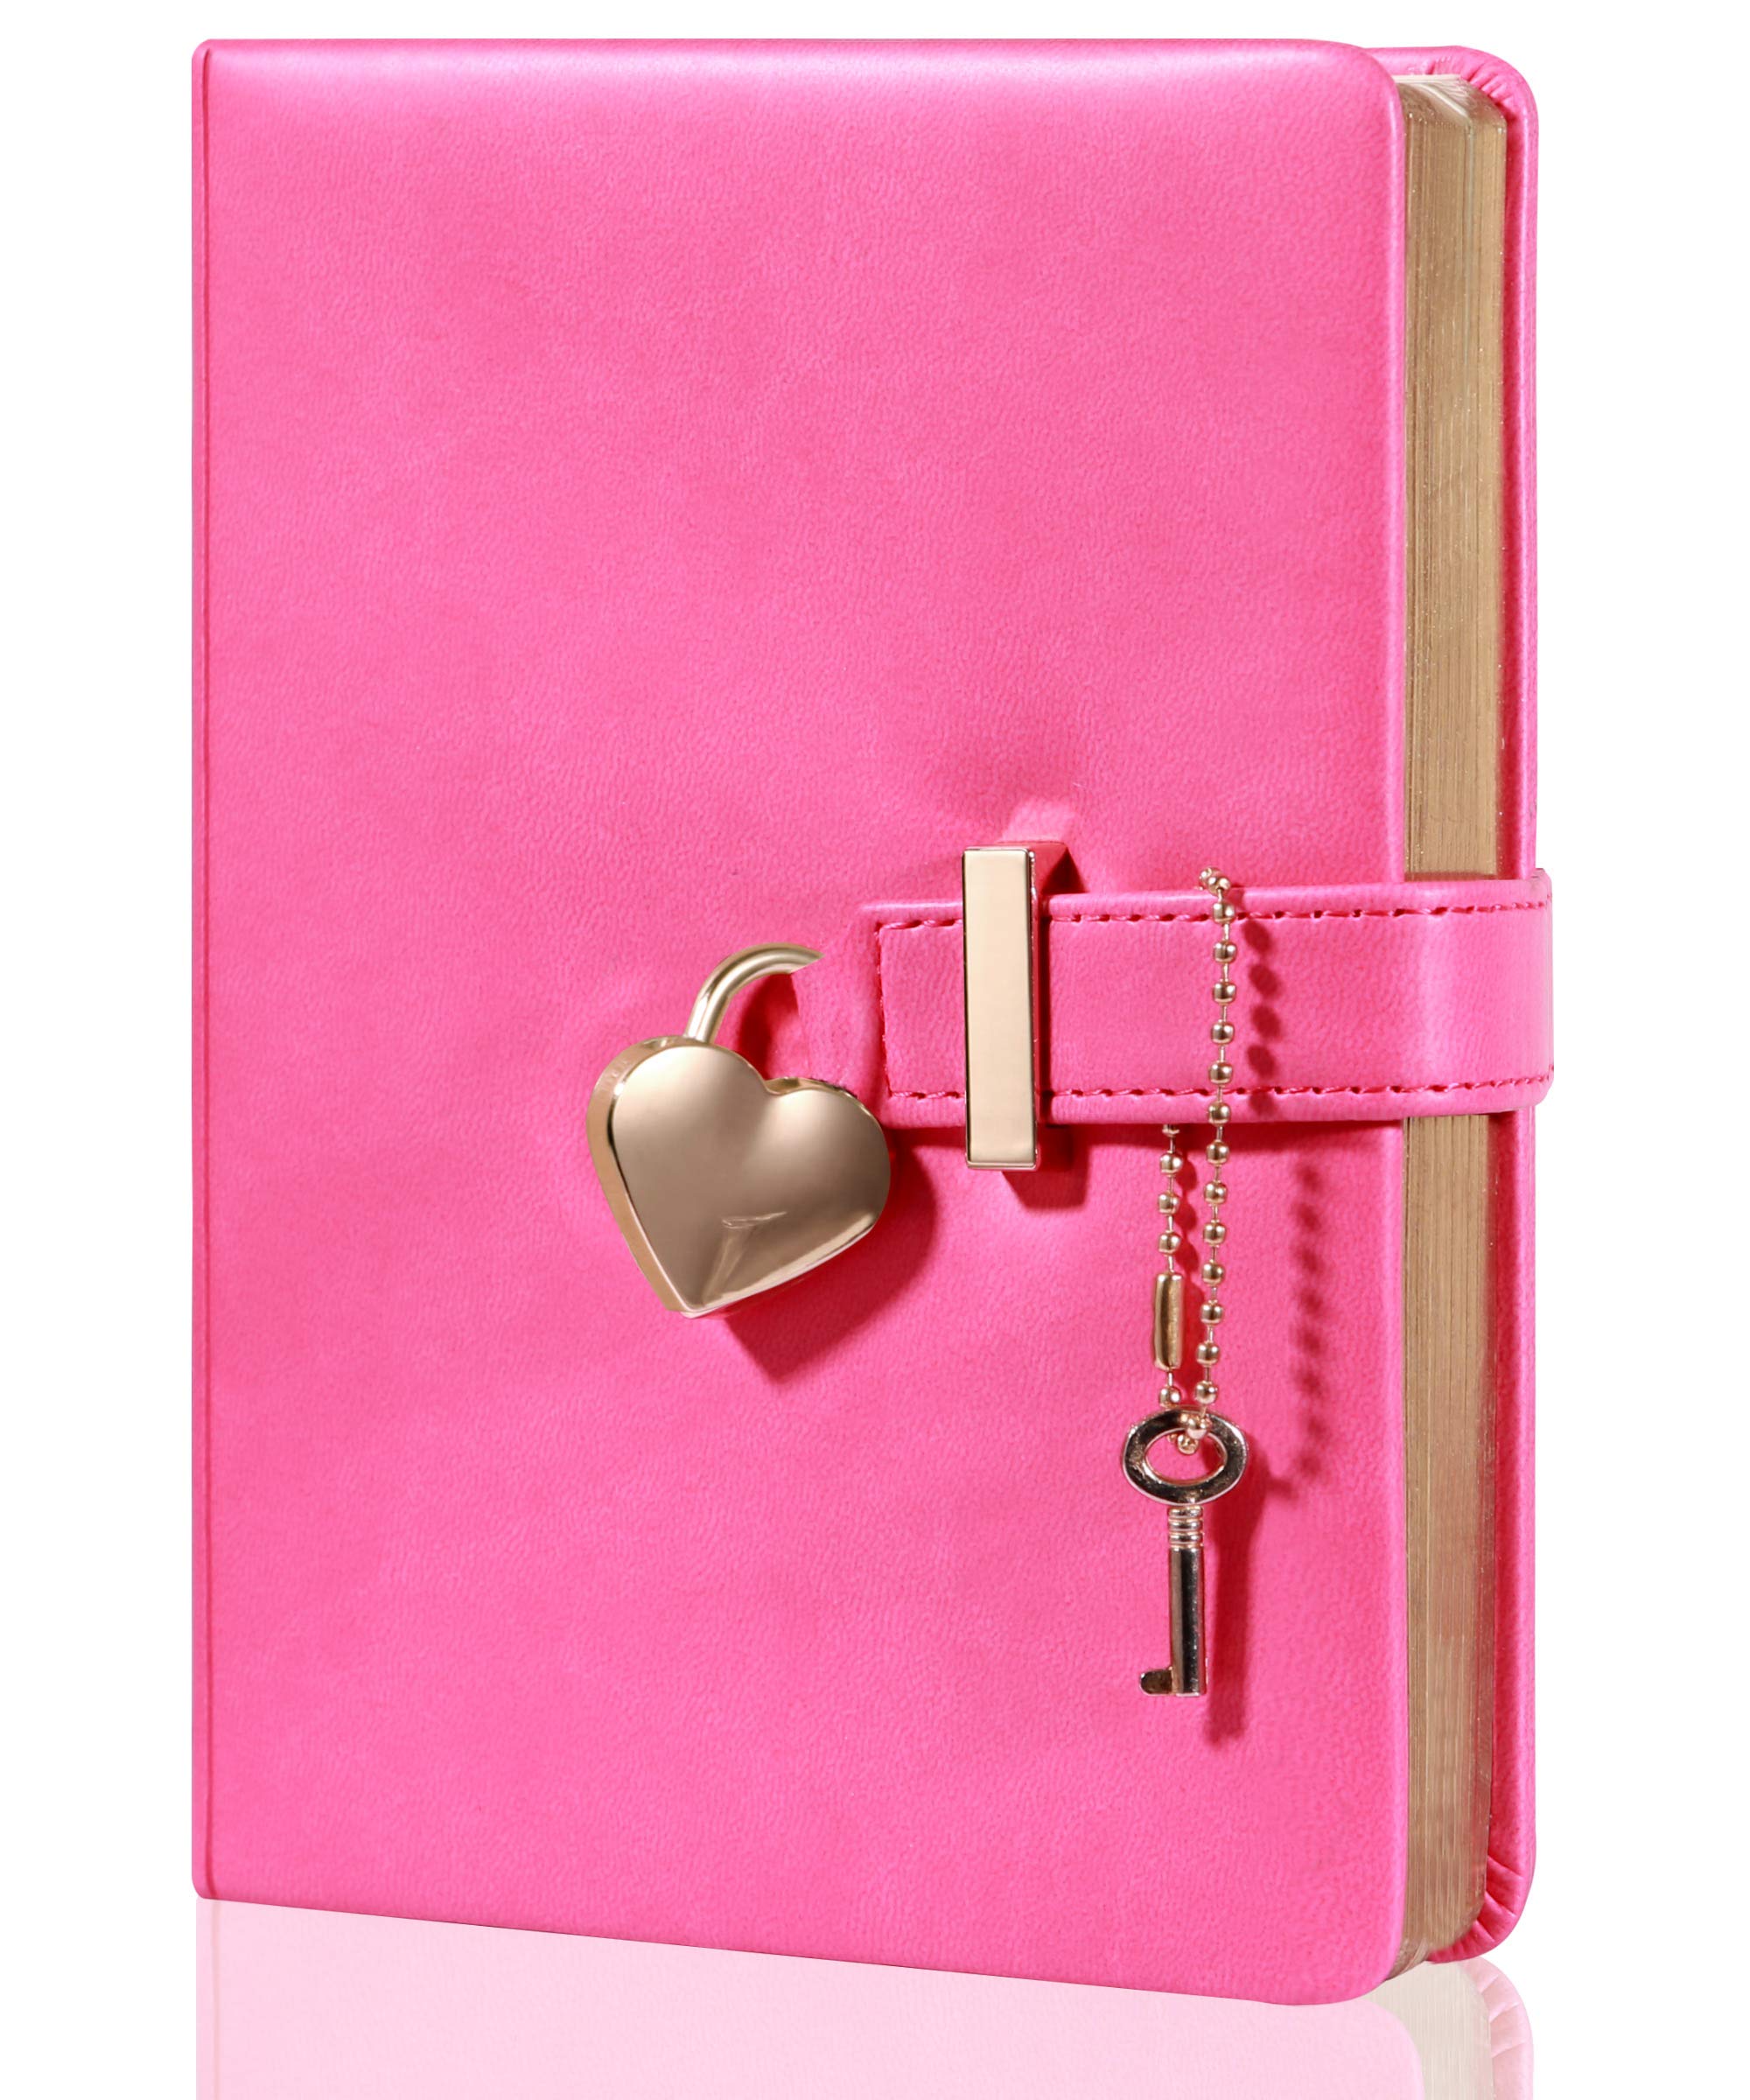 cagie Heart Shaped Lock Diary with Key for girls PU Leather cover Journal Personal Organizers Secret Notebook for Women, B6 Size 53x7 